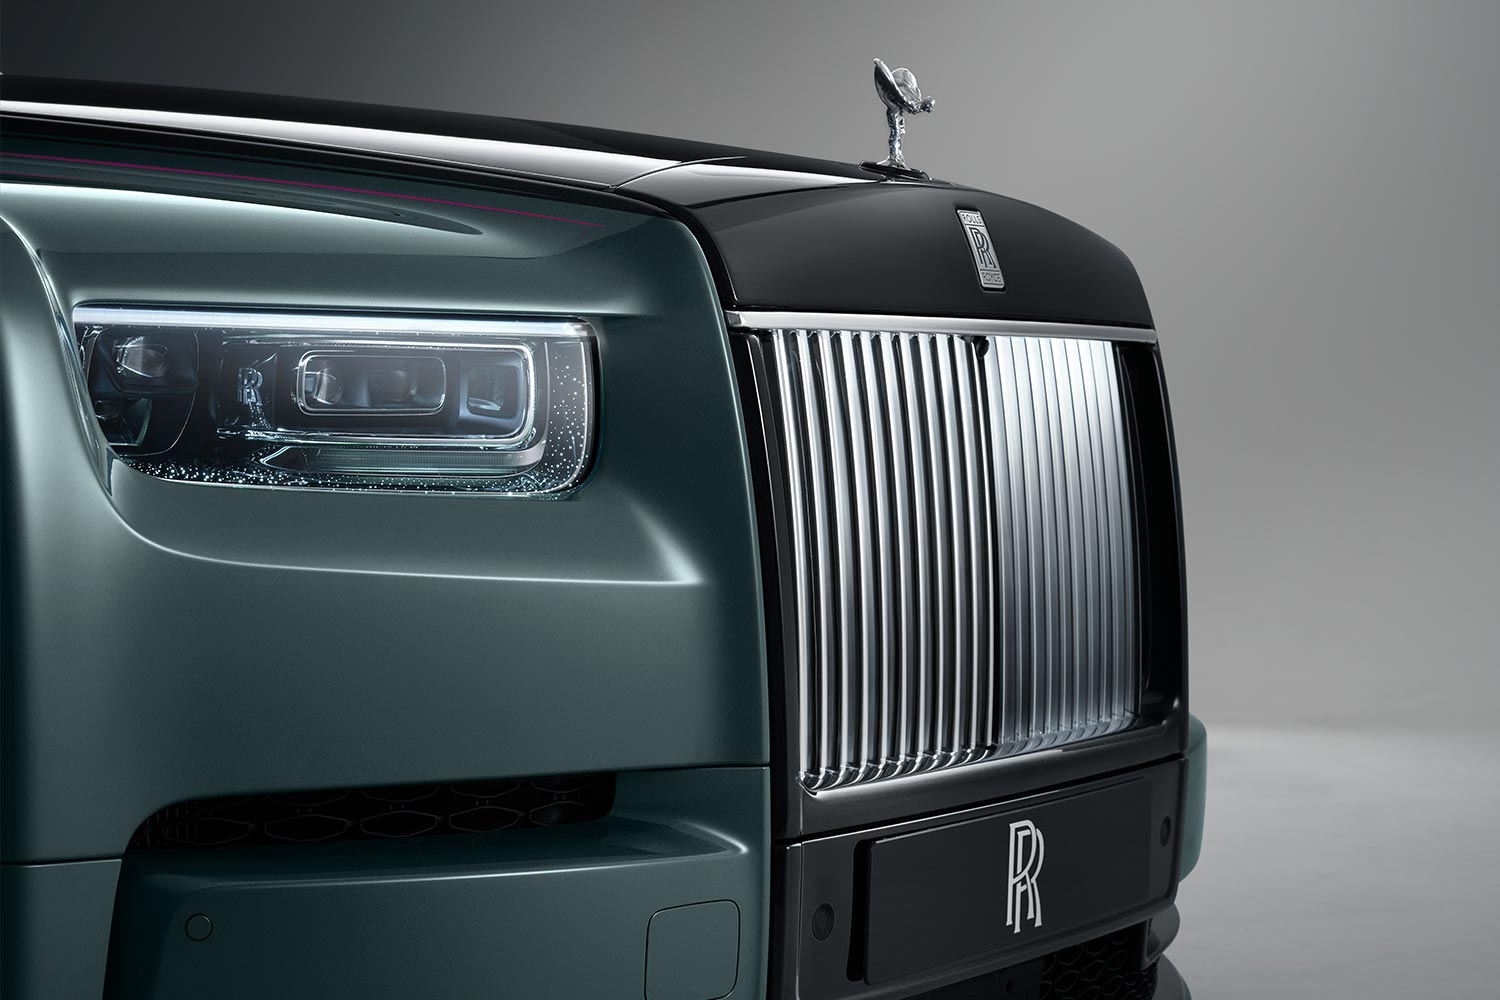 A close-up of the Rolls-Royce Phantom Series II grille and headlights with laser-cut starlight 